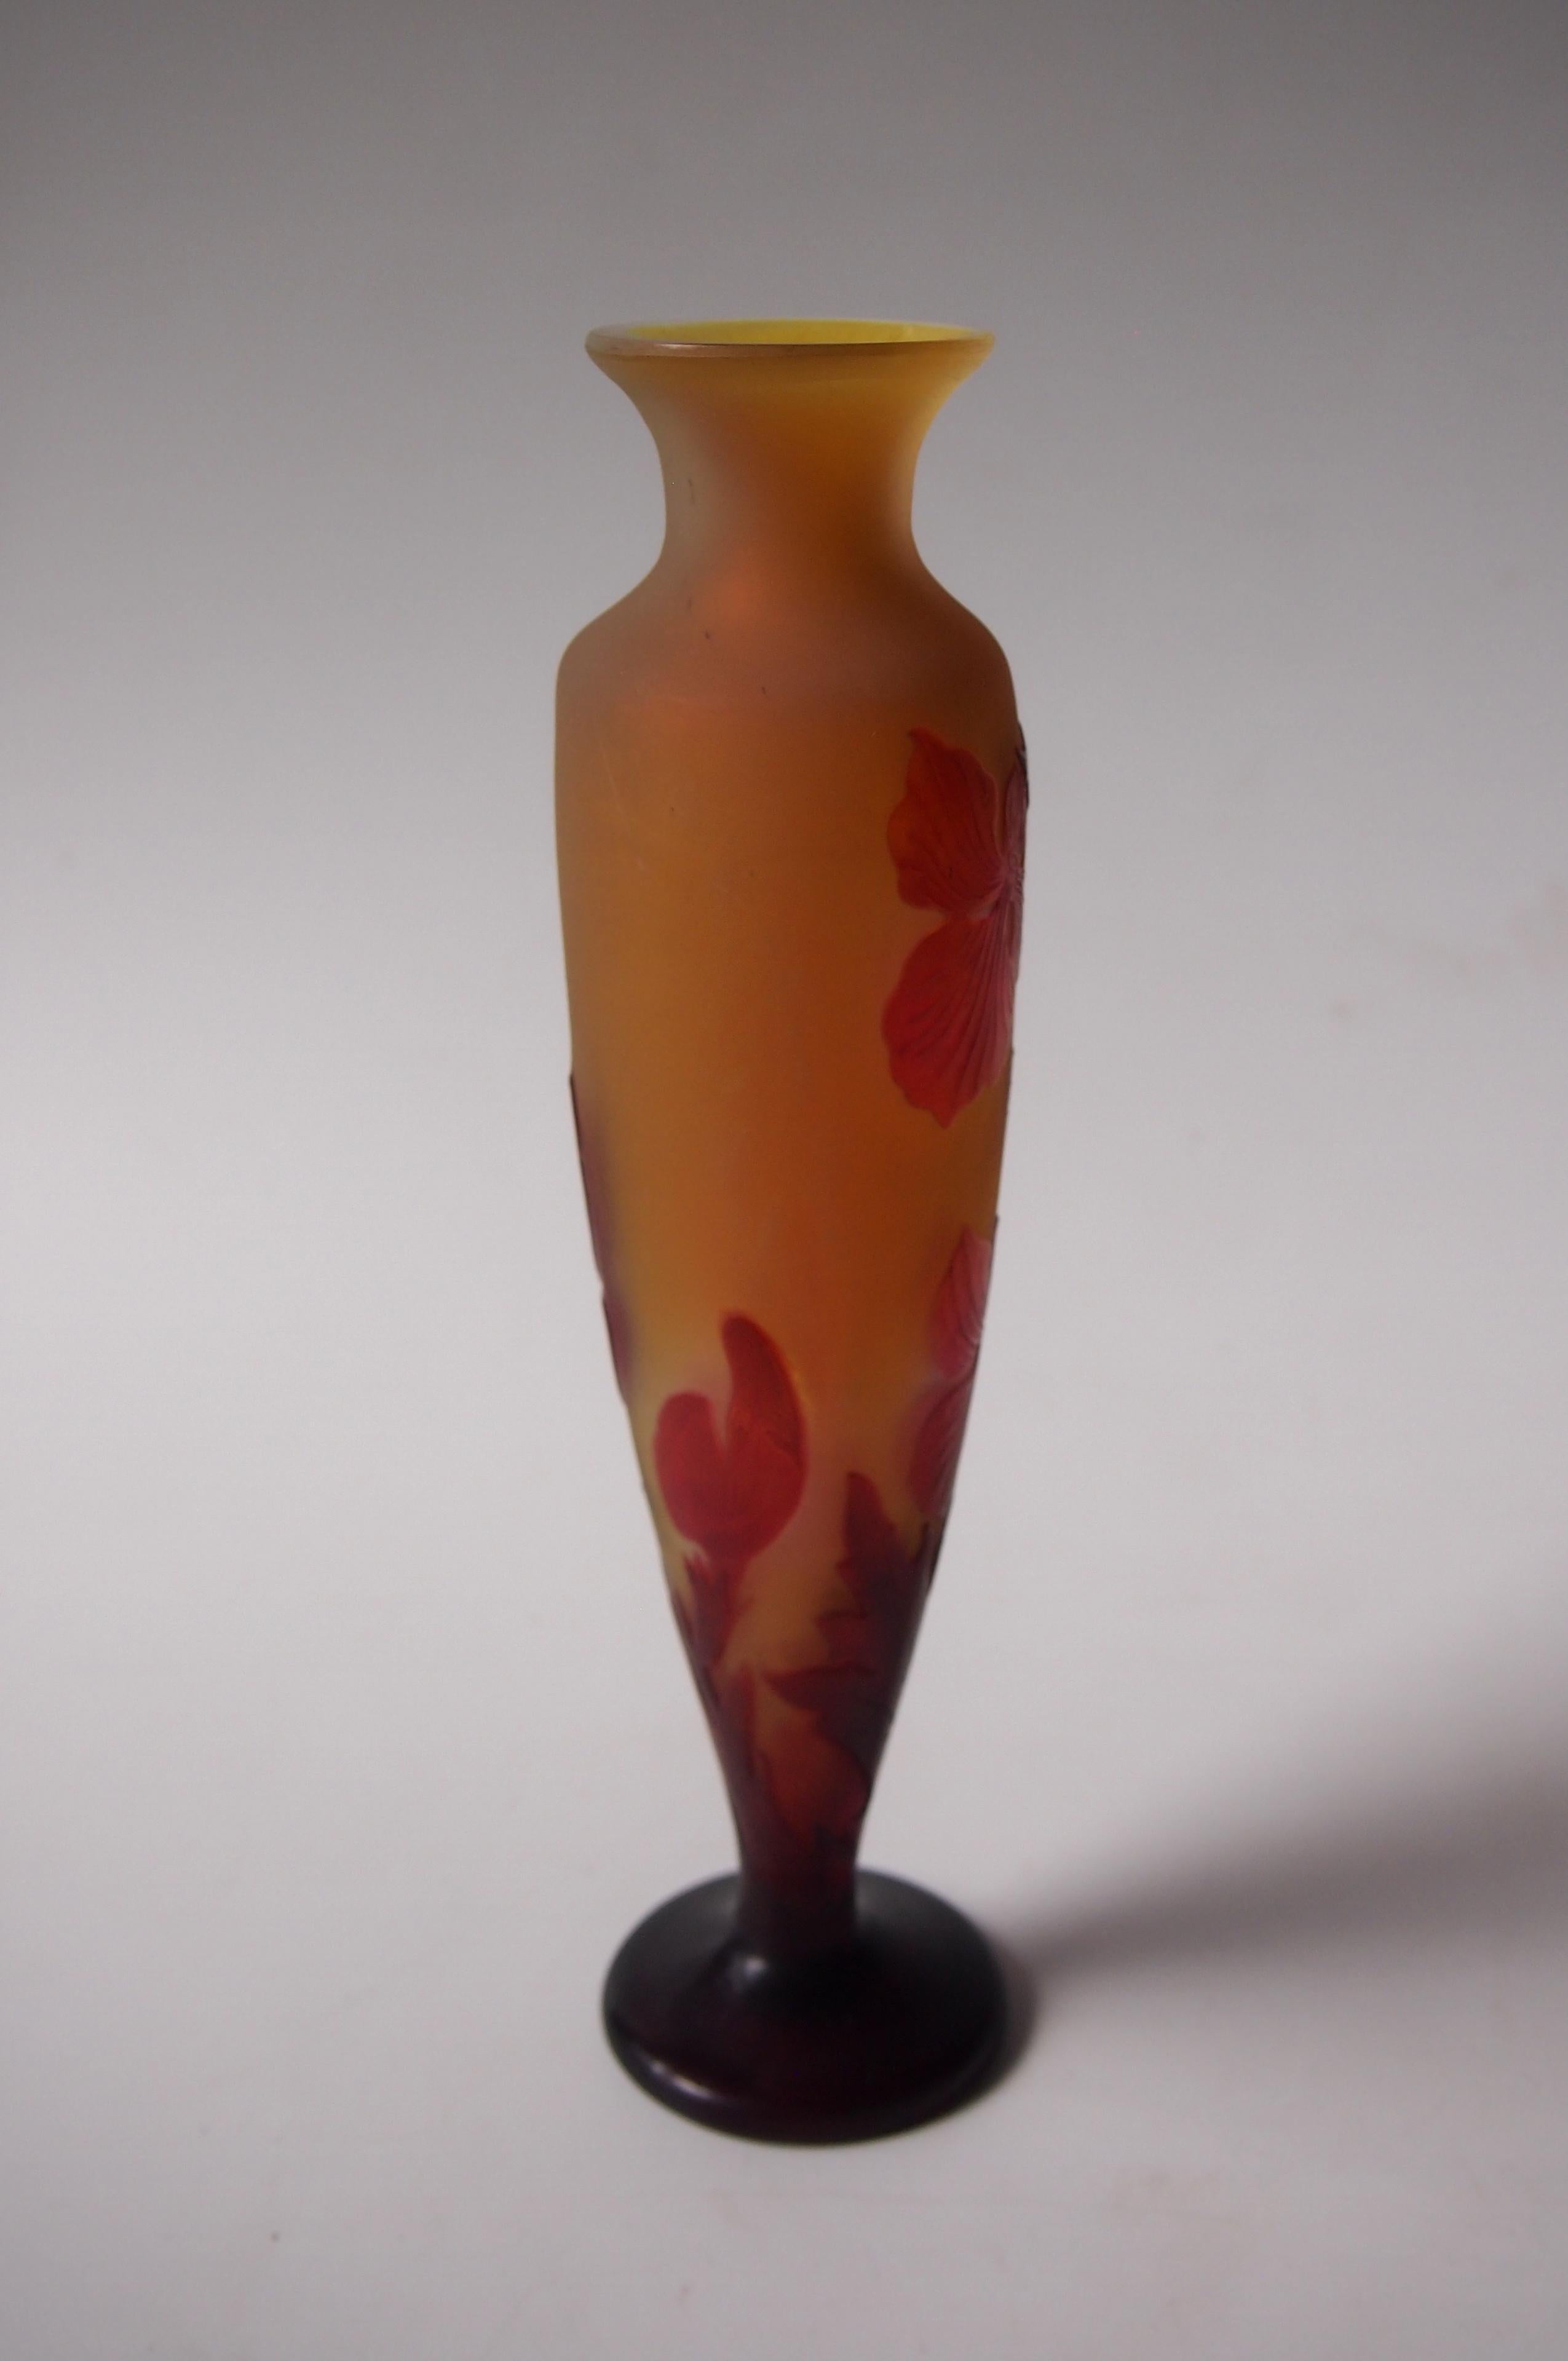 Early 20th Century French Art Nouveau Red & Yellow Signed Emile Galle Cameo Glass Vase, circa 1900